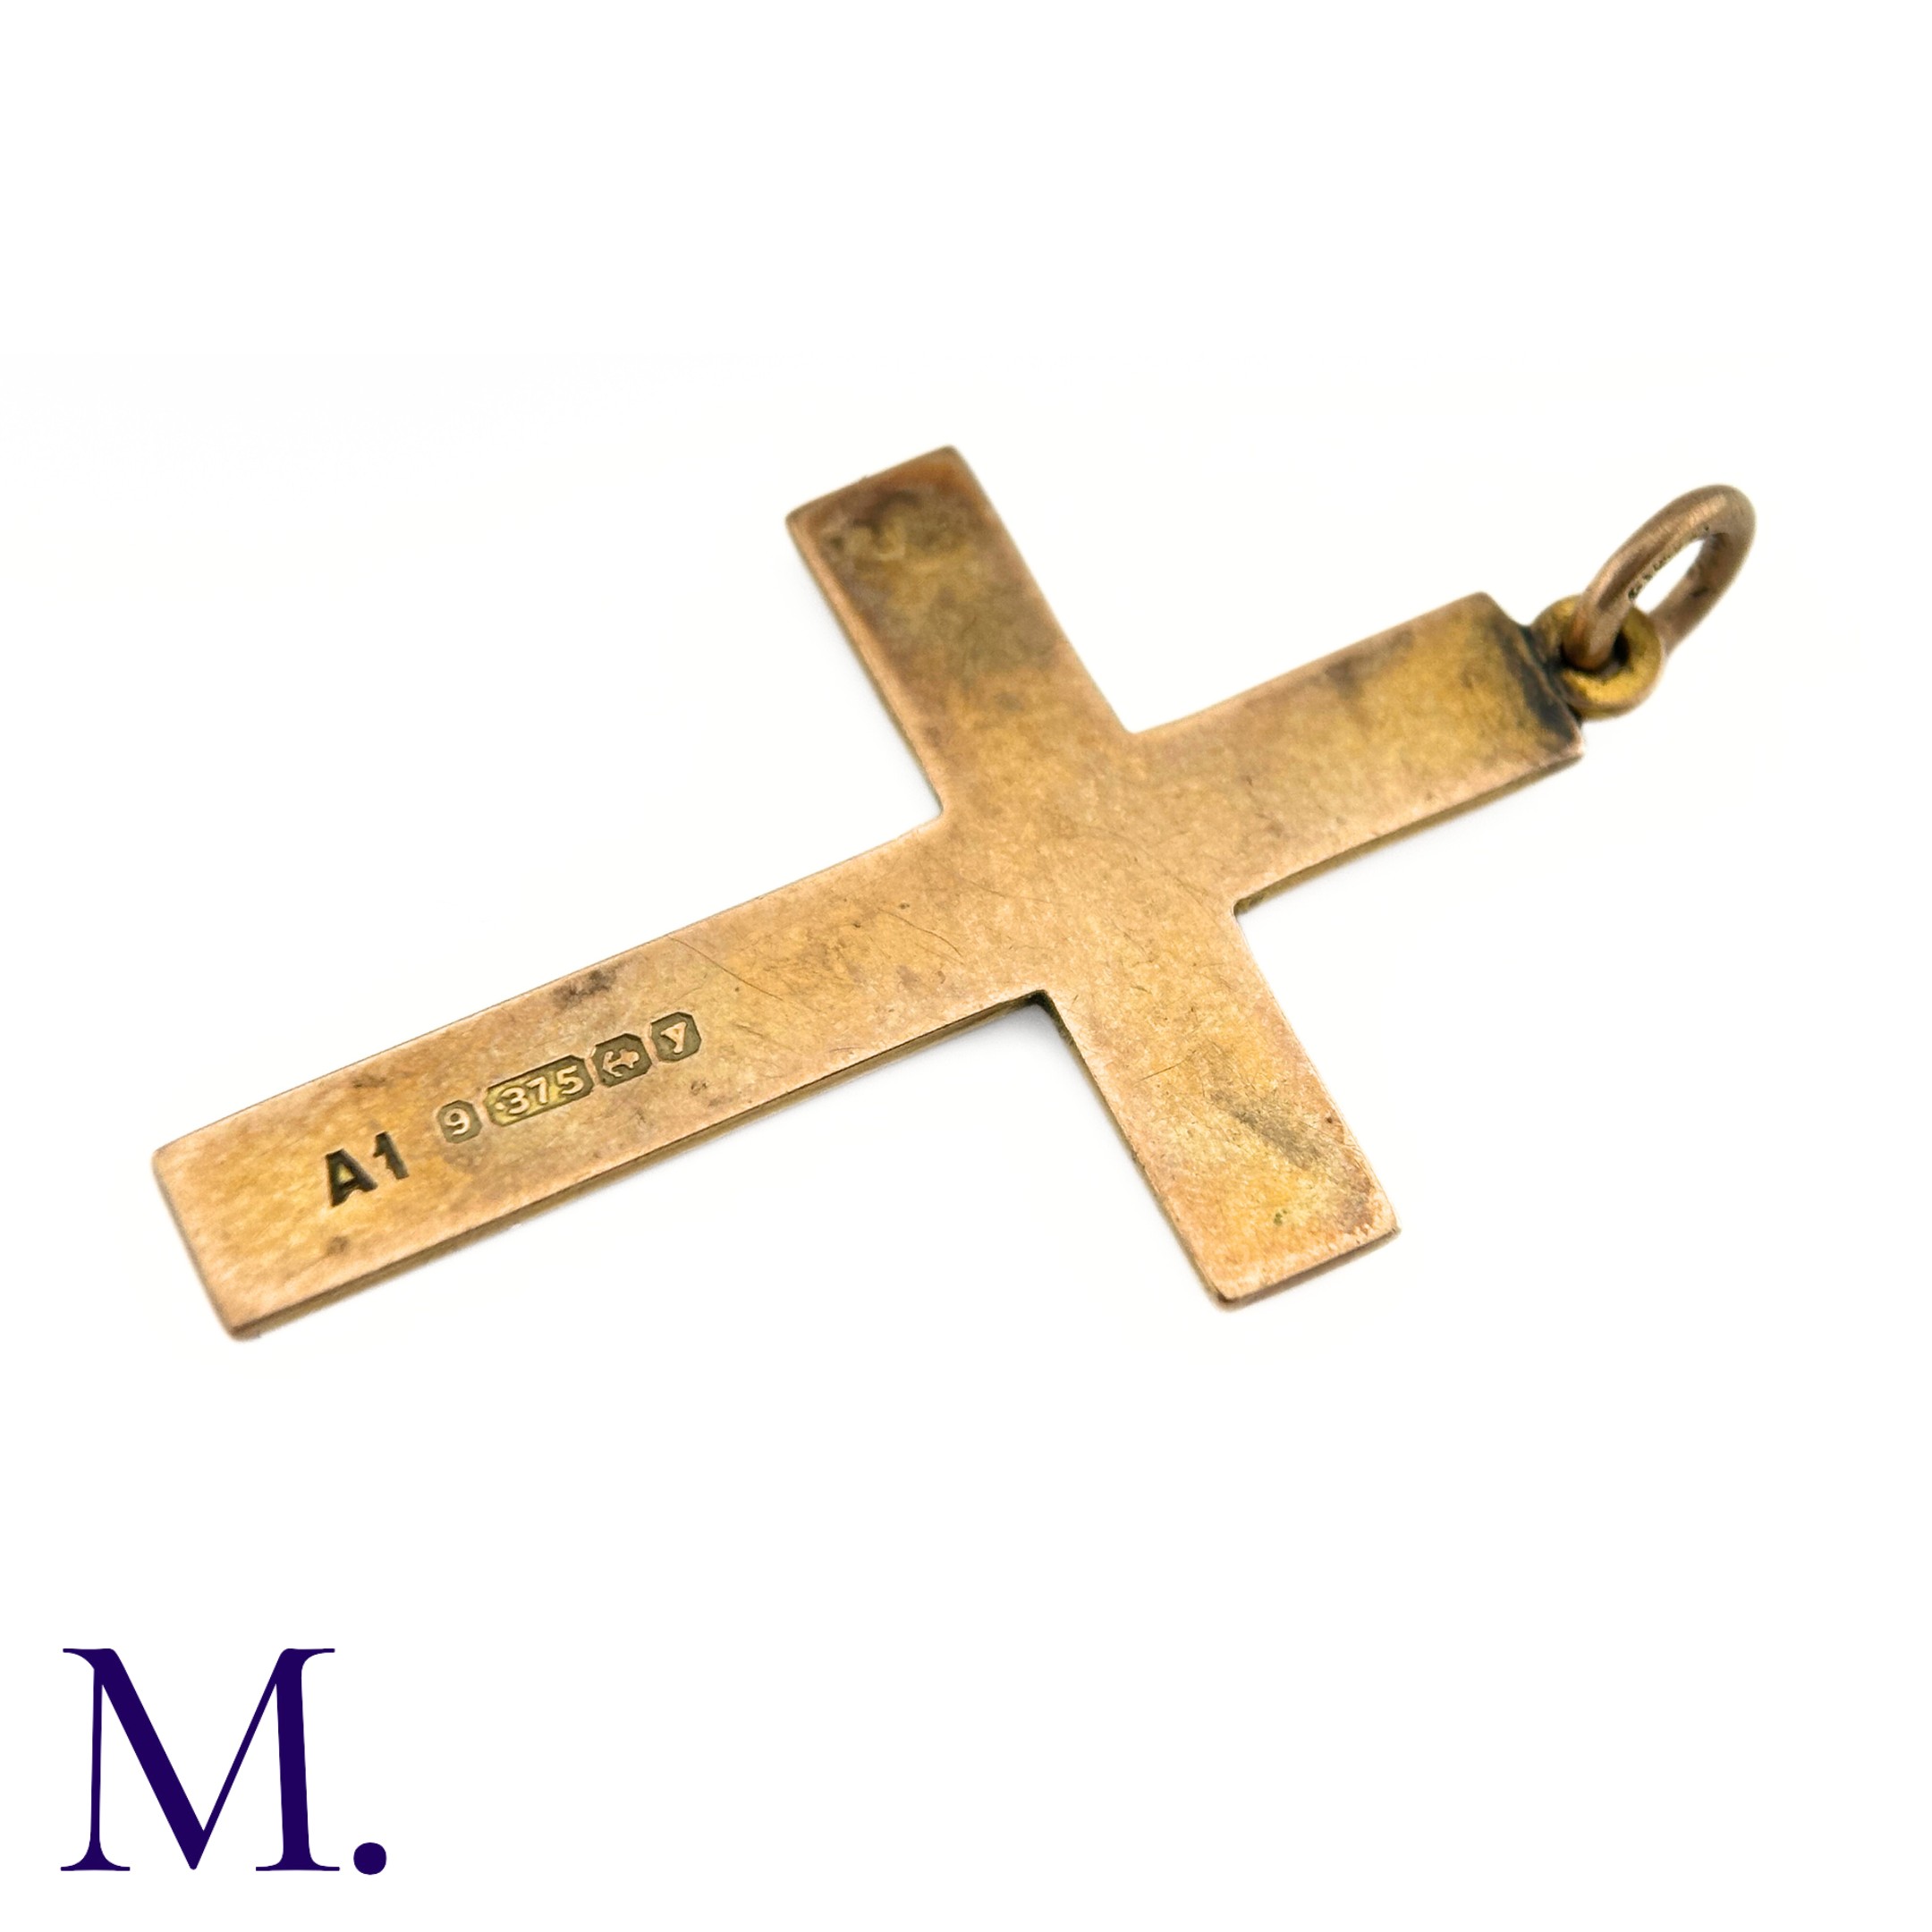 NO RESERVE - An Antique Gold Cross Pendant The rose gold cross is hallmarked for 9ct gold and is - Image 3 of 3